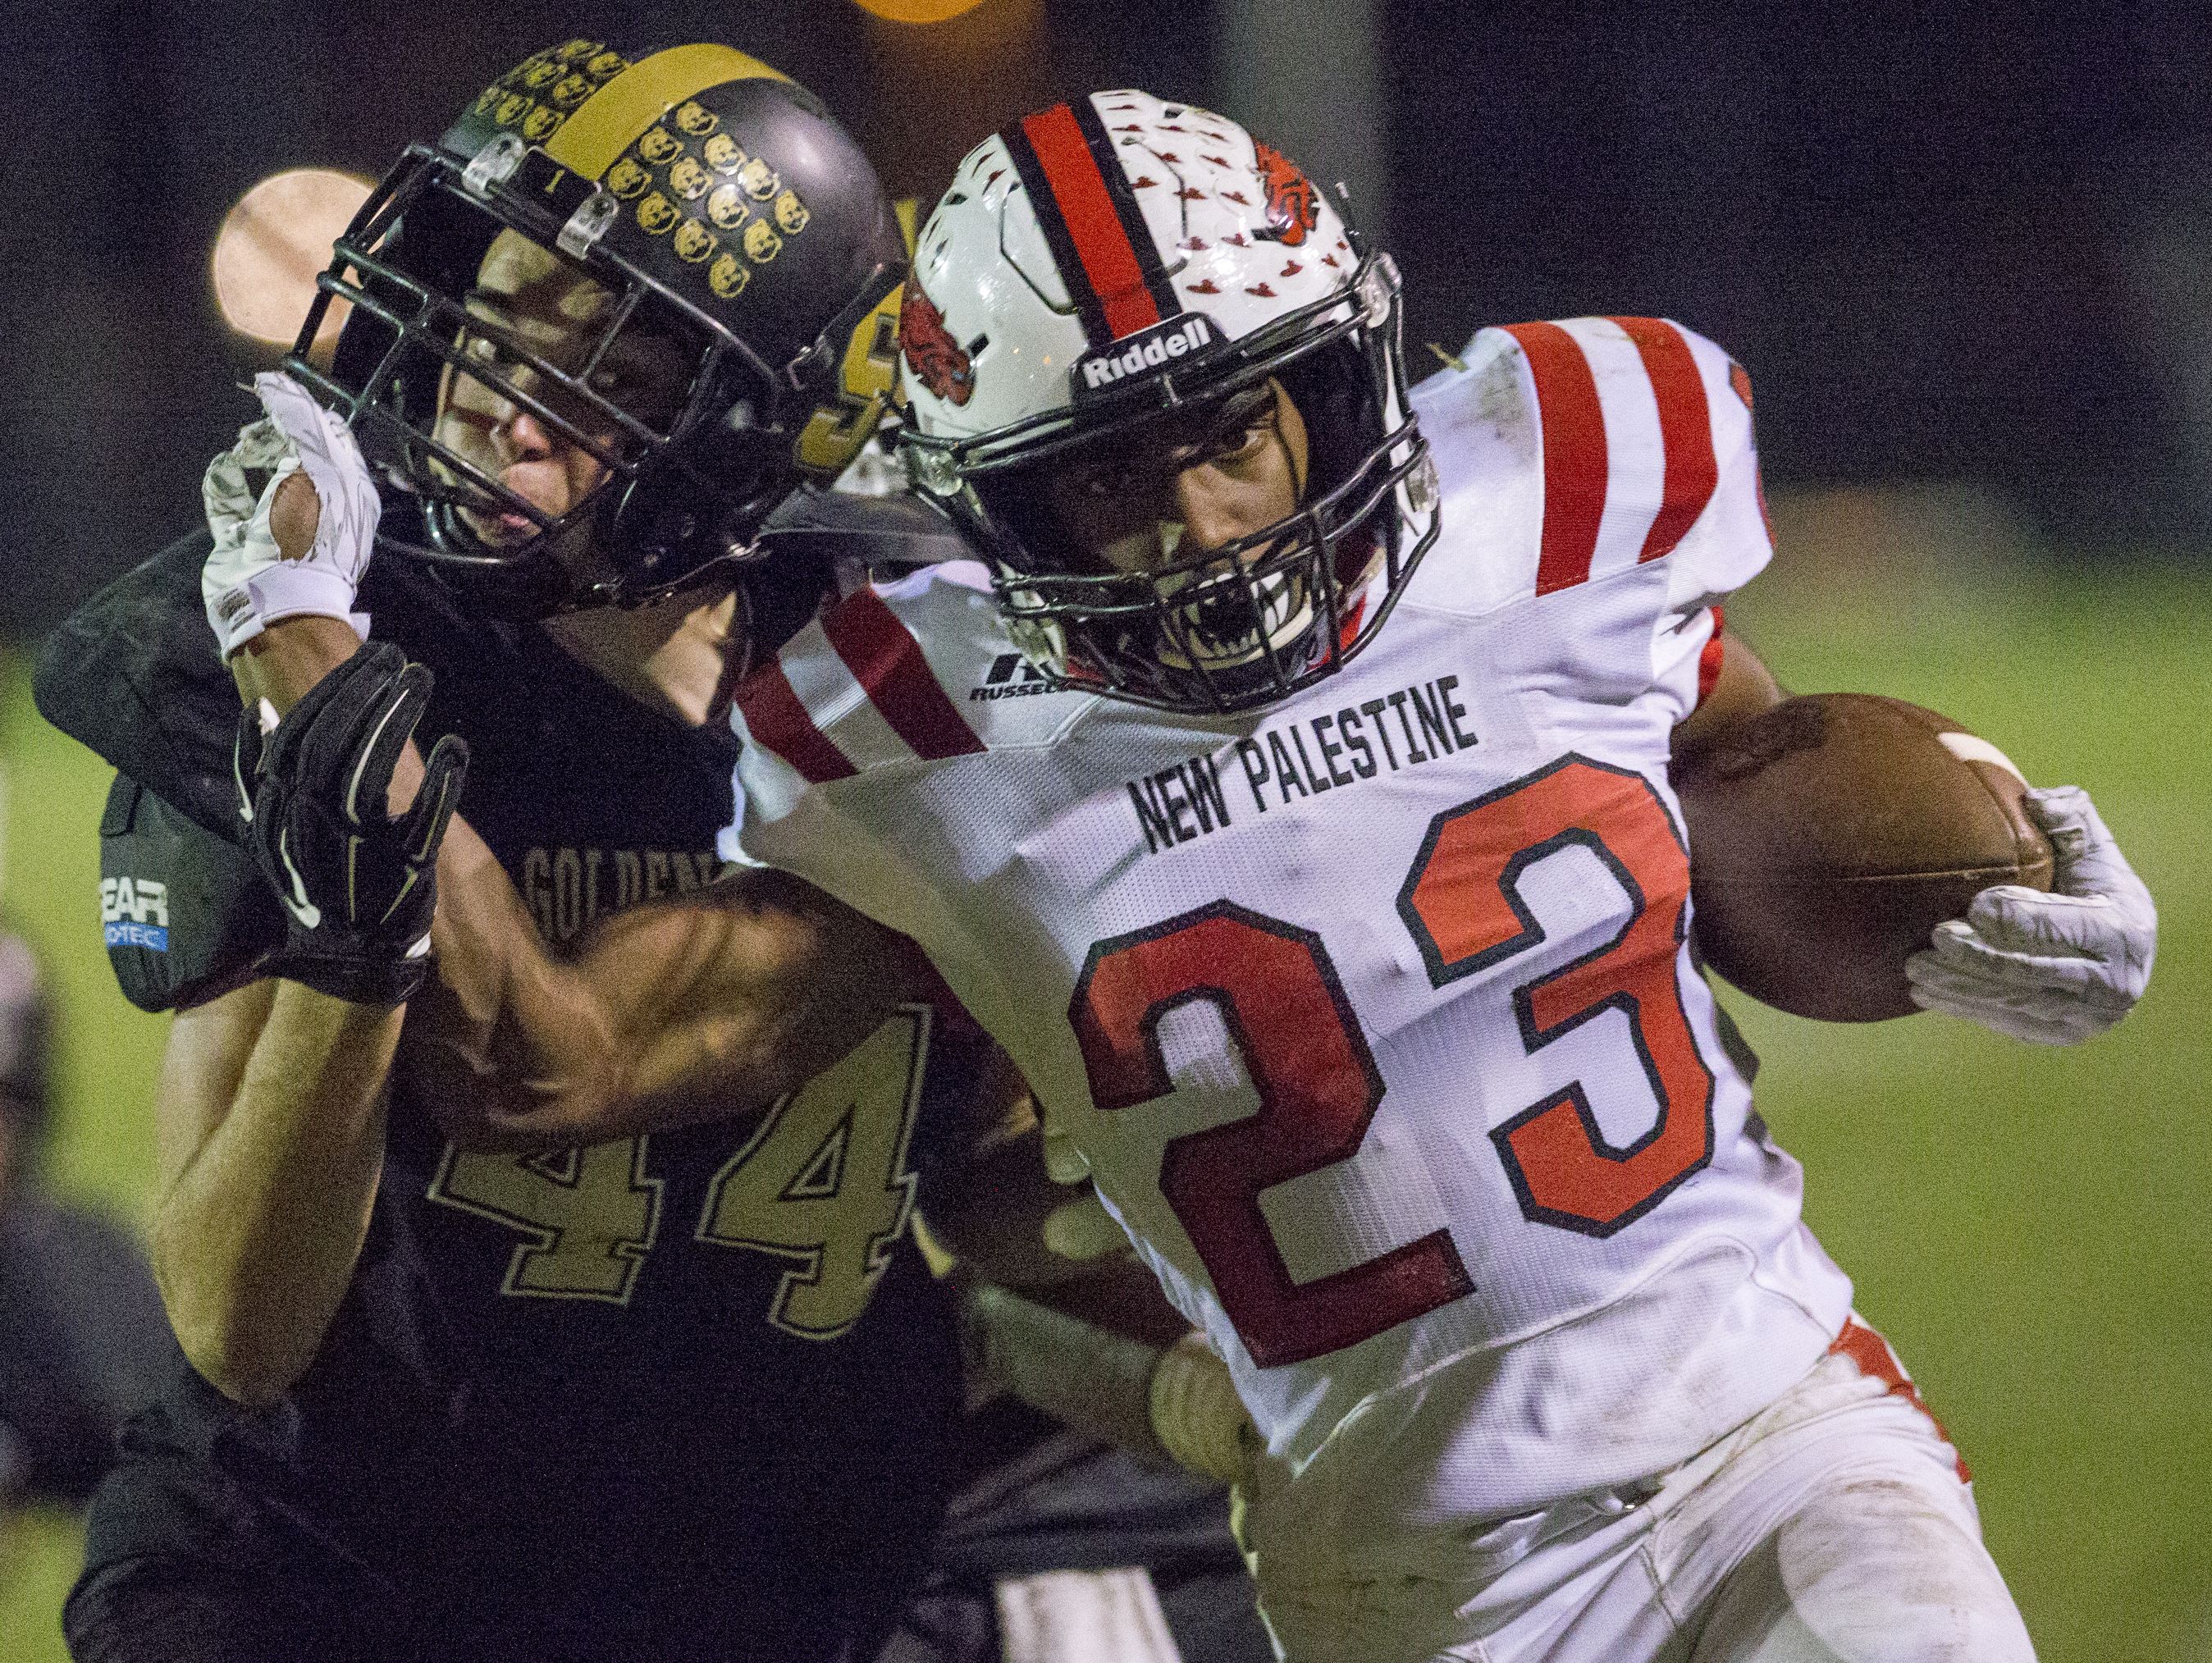 DuRon Ford of New Palestine, tries to shed tackler Nathan Phillips of Shelbyville, during the third quarter, New Palestine High School at Shelbyville High School in a battle of unbeatens, Shelbyville, Friday, Sept. 30, 2016.